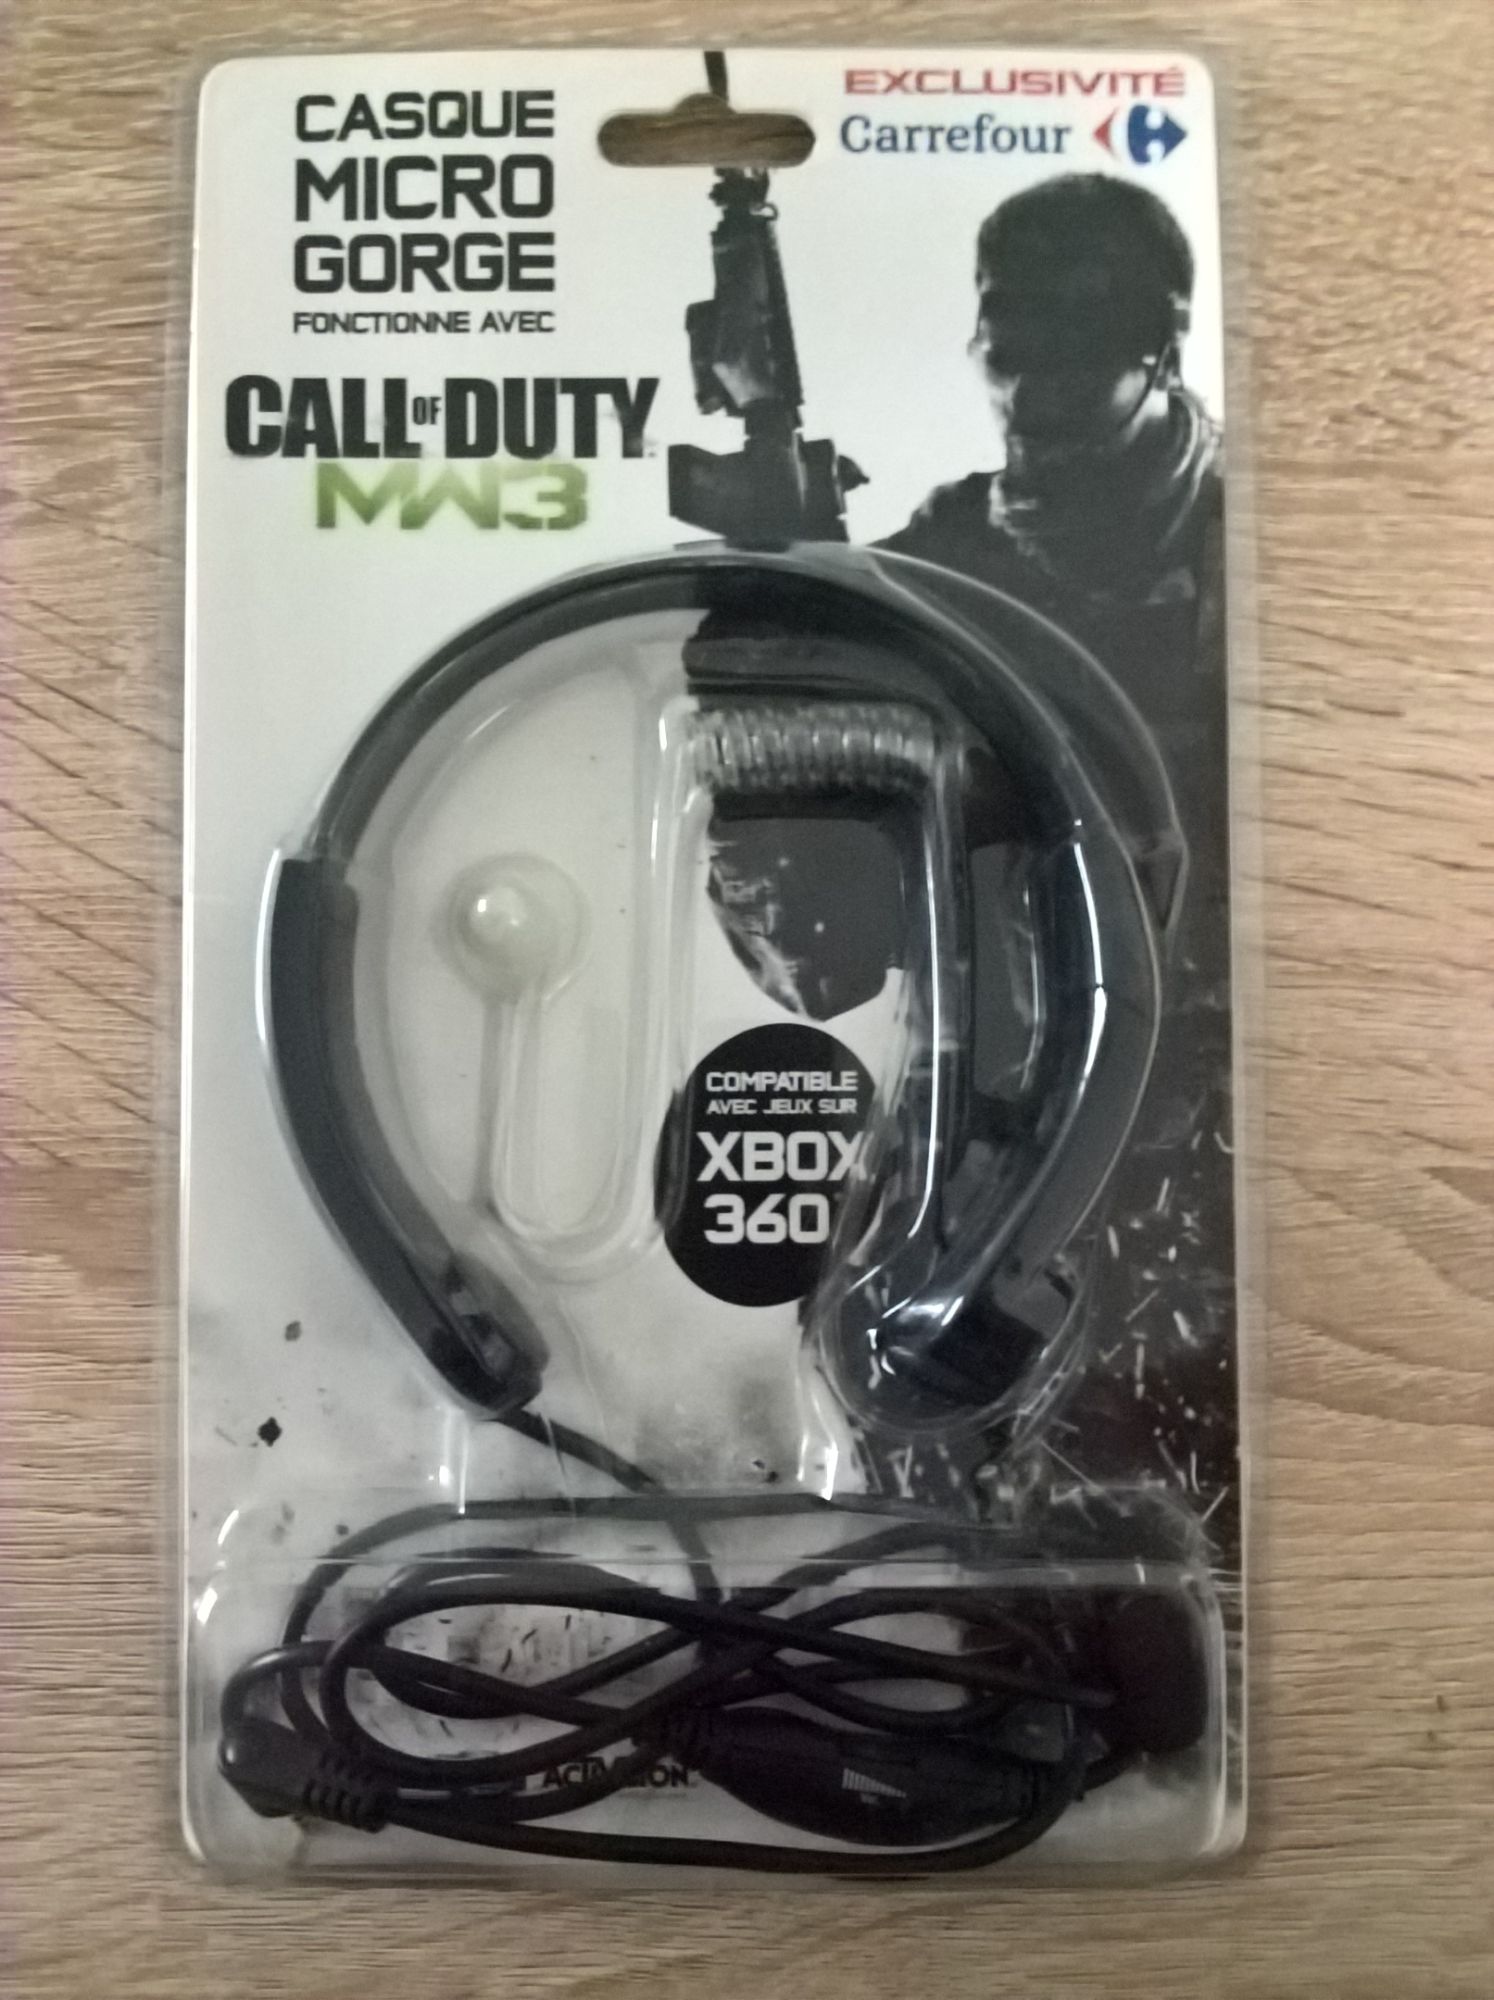 Casque Micro Gorge Call of Duty MW3 Xbox 360 d'occasion  